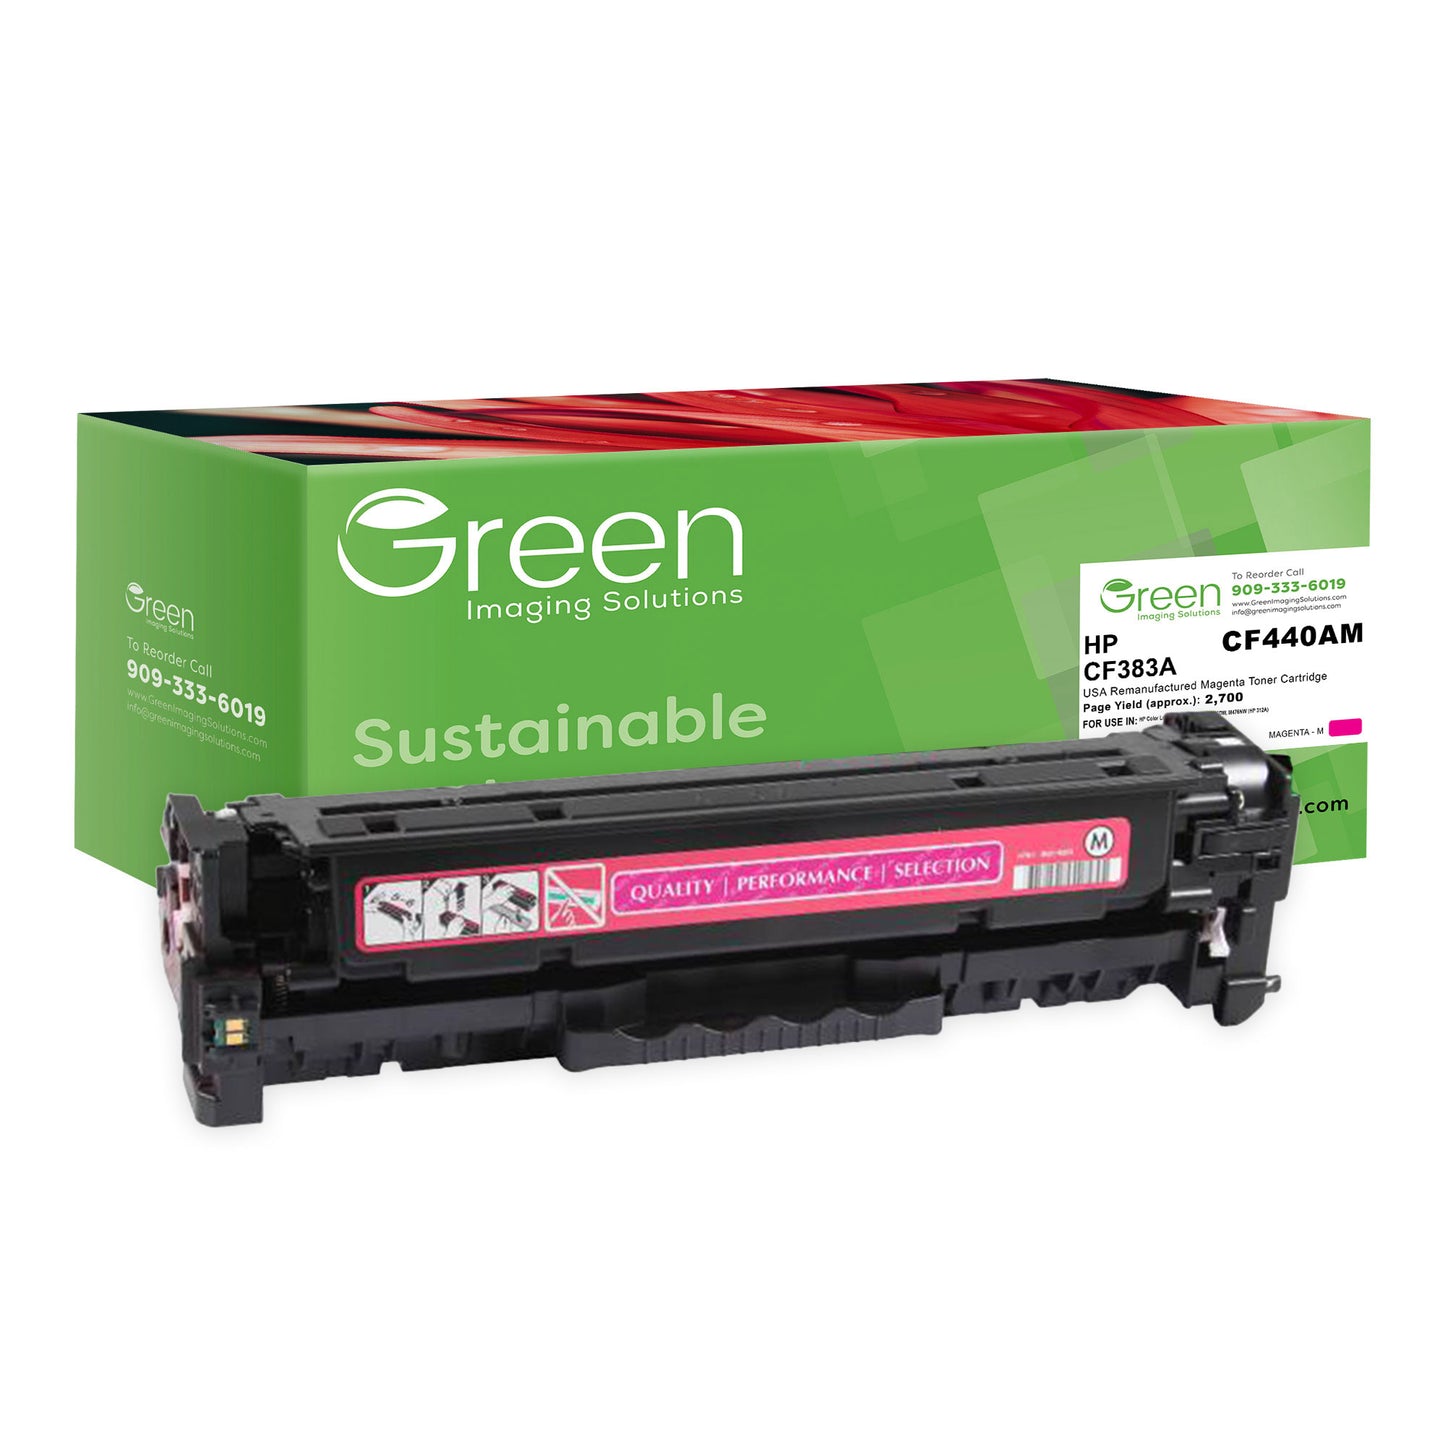 GIS USA Remanufactured Magenta Toner Cartridge for HP CF383A (HP 312A)